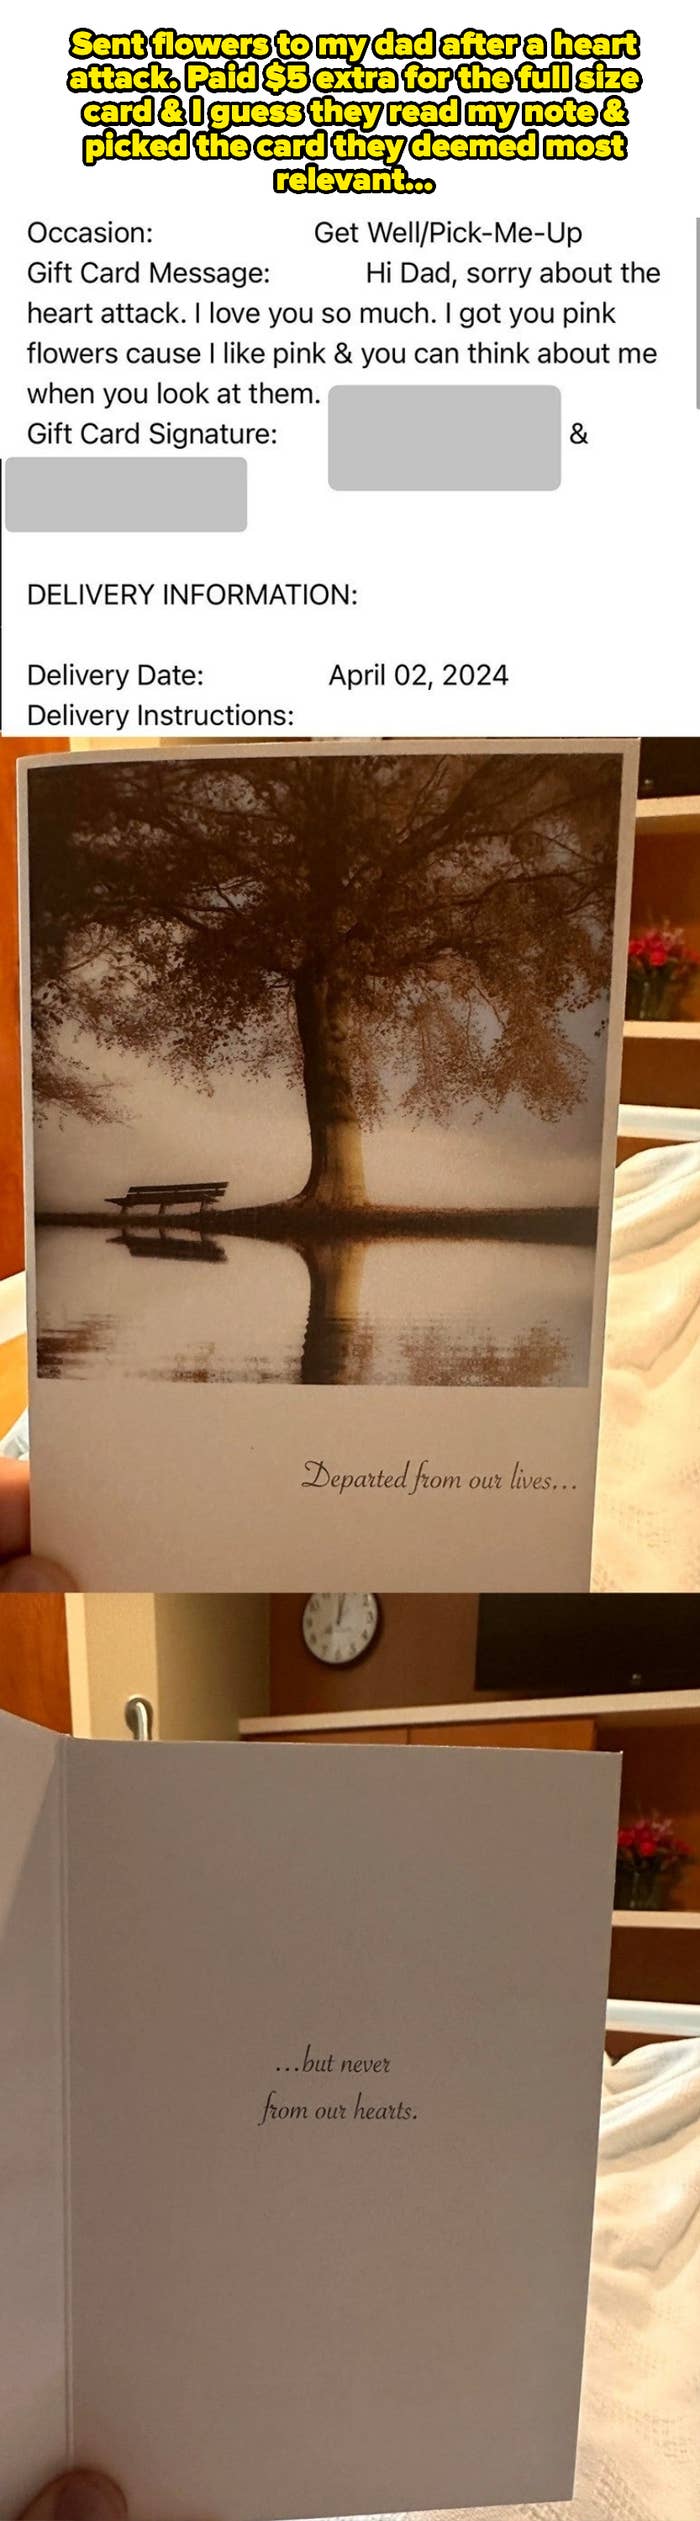 Card with a lake and trees saying &quot;Departed from our lives... but never from our hearts.&quot; Gift card message apologizes for a father&#x27;s heart attack, expressing love. Delivery on April 2, 2024